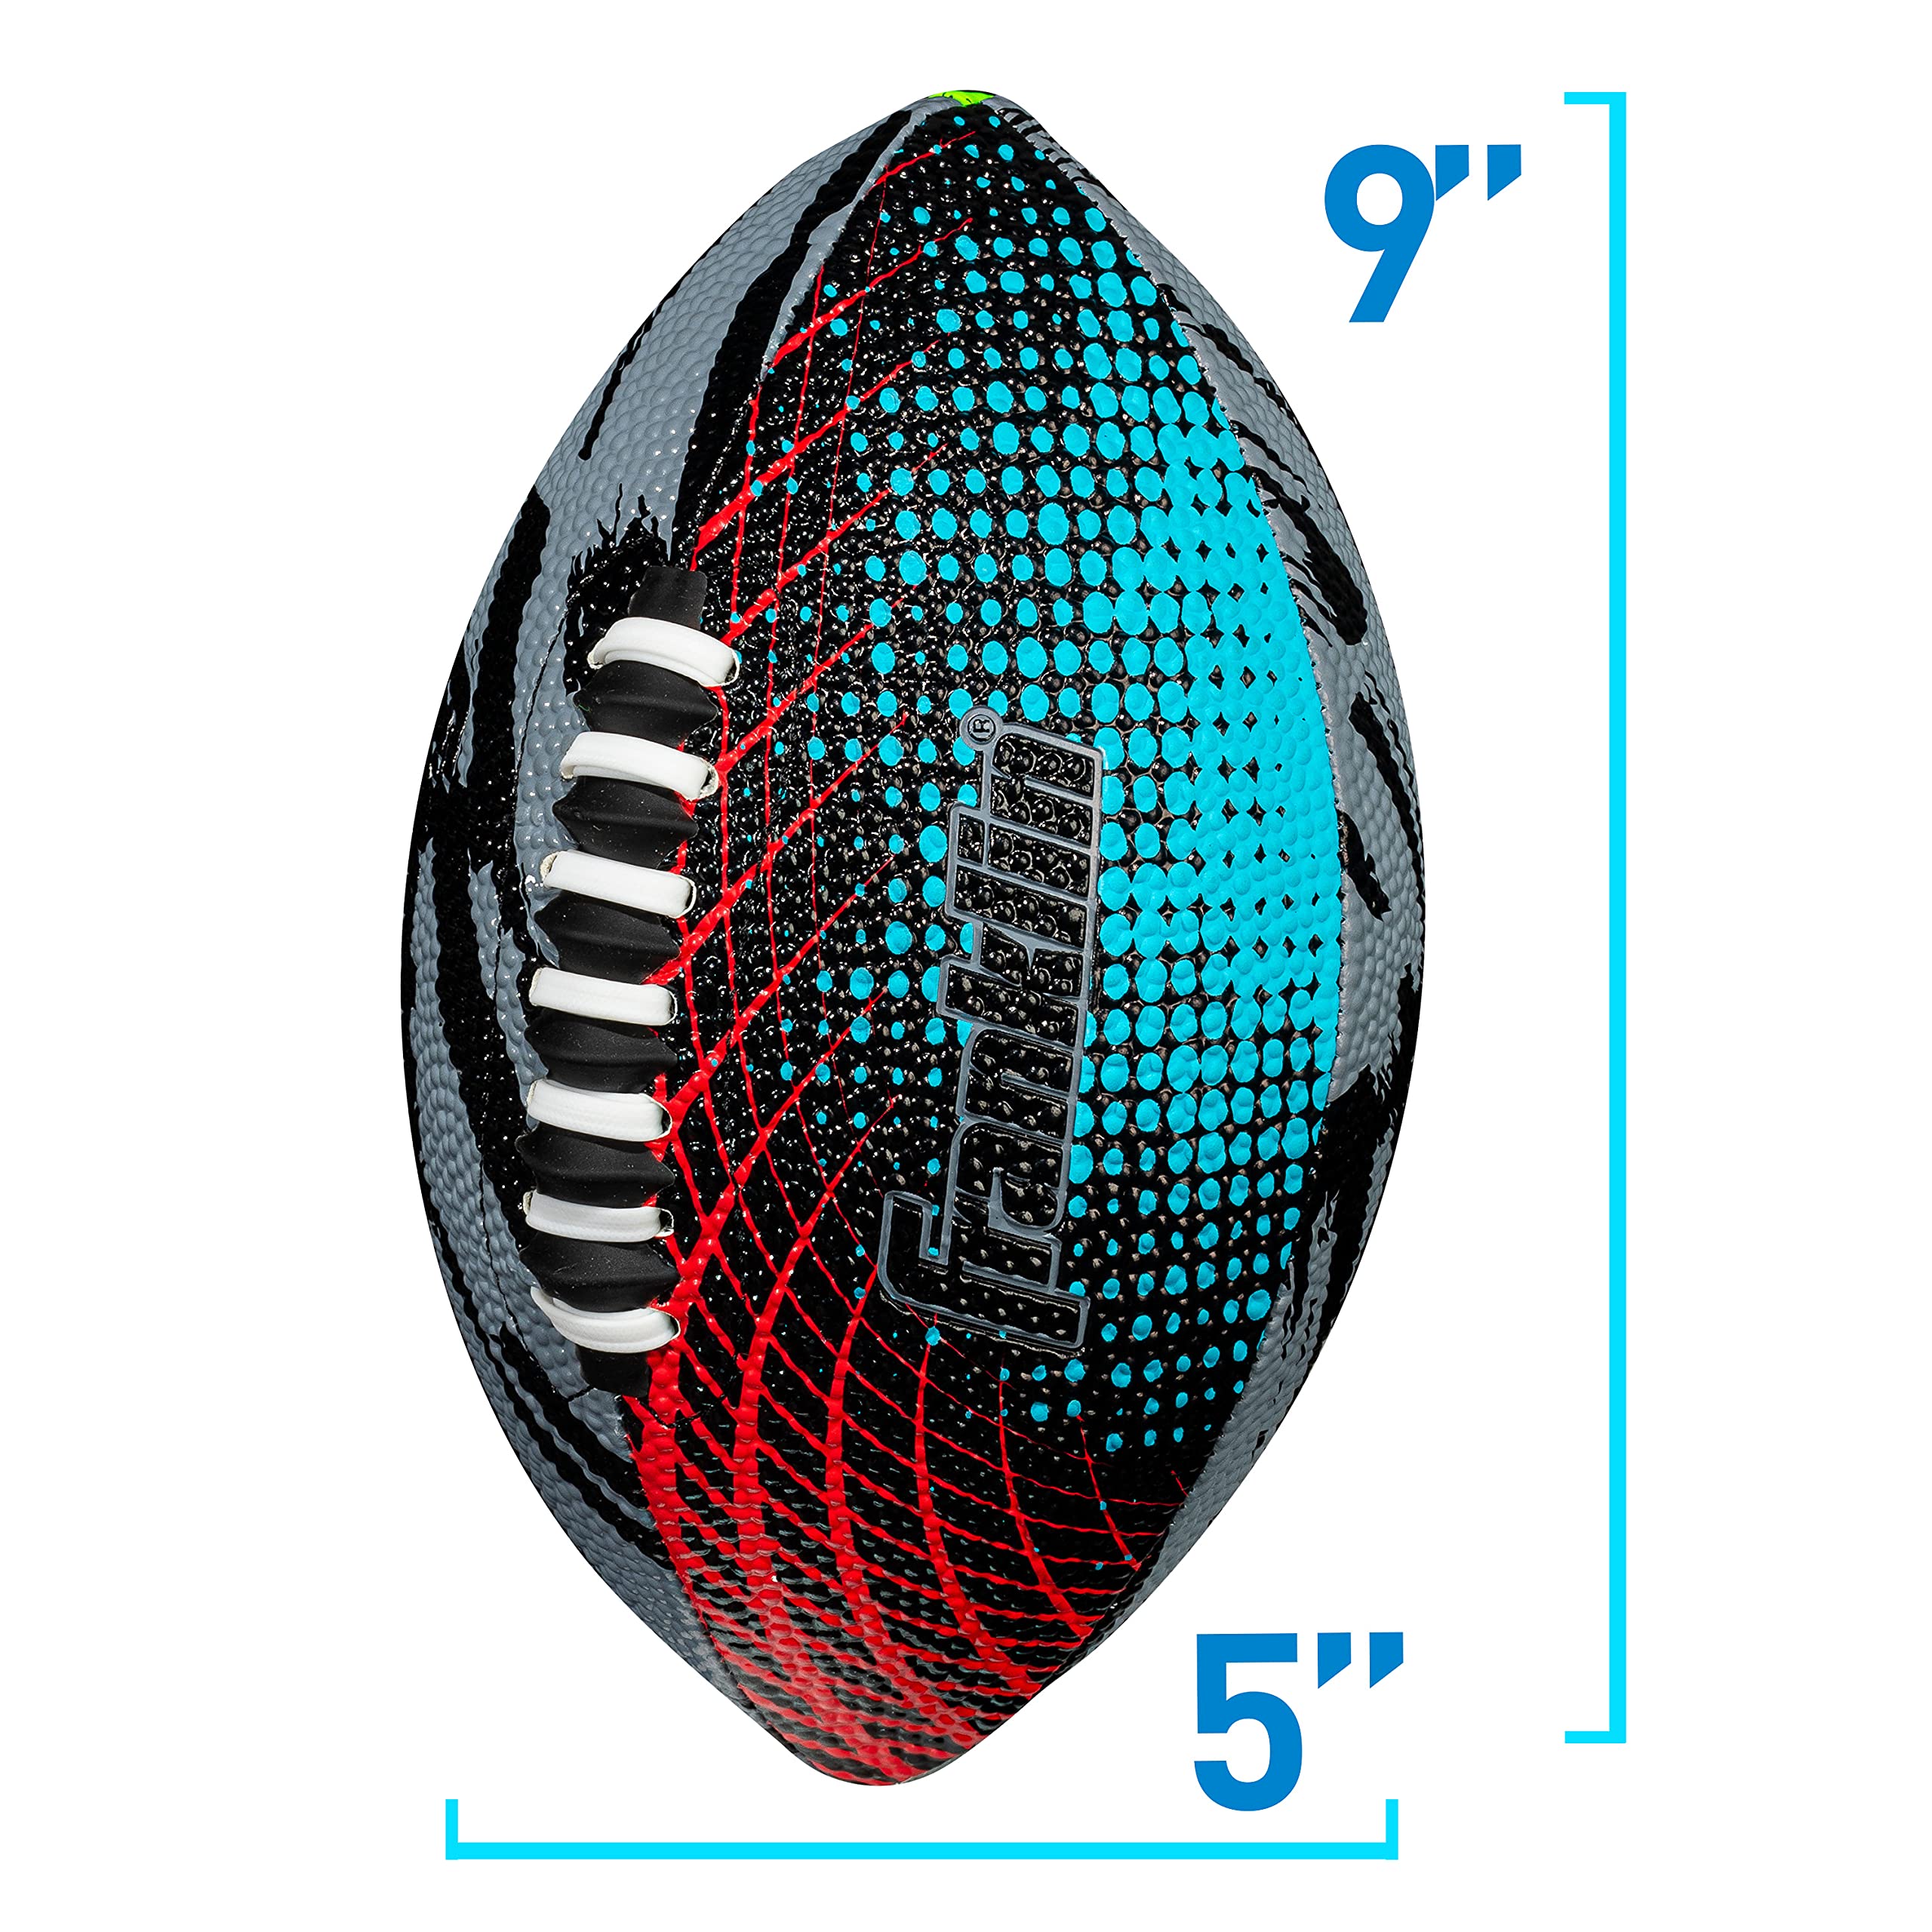 Franklin Sports Mystic Mini Football - Kids Mini Sized Football - Soft Foam Cover - Extra Grip Laces - Perfect for Kids - Air Pump Included